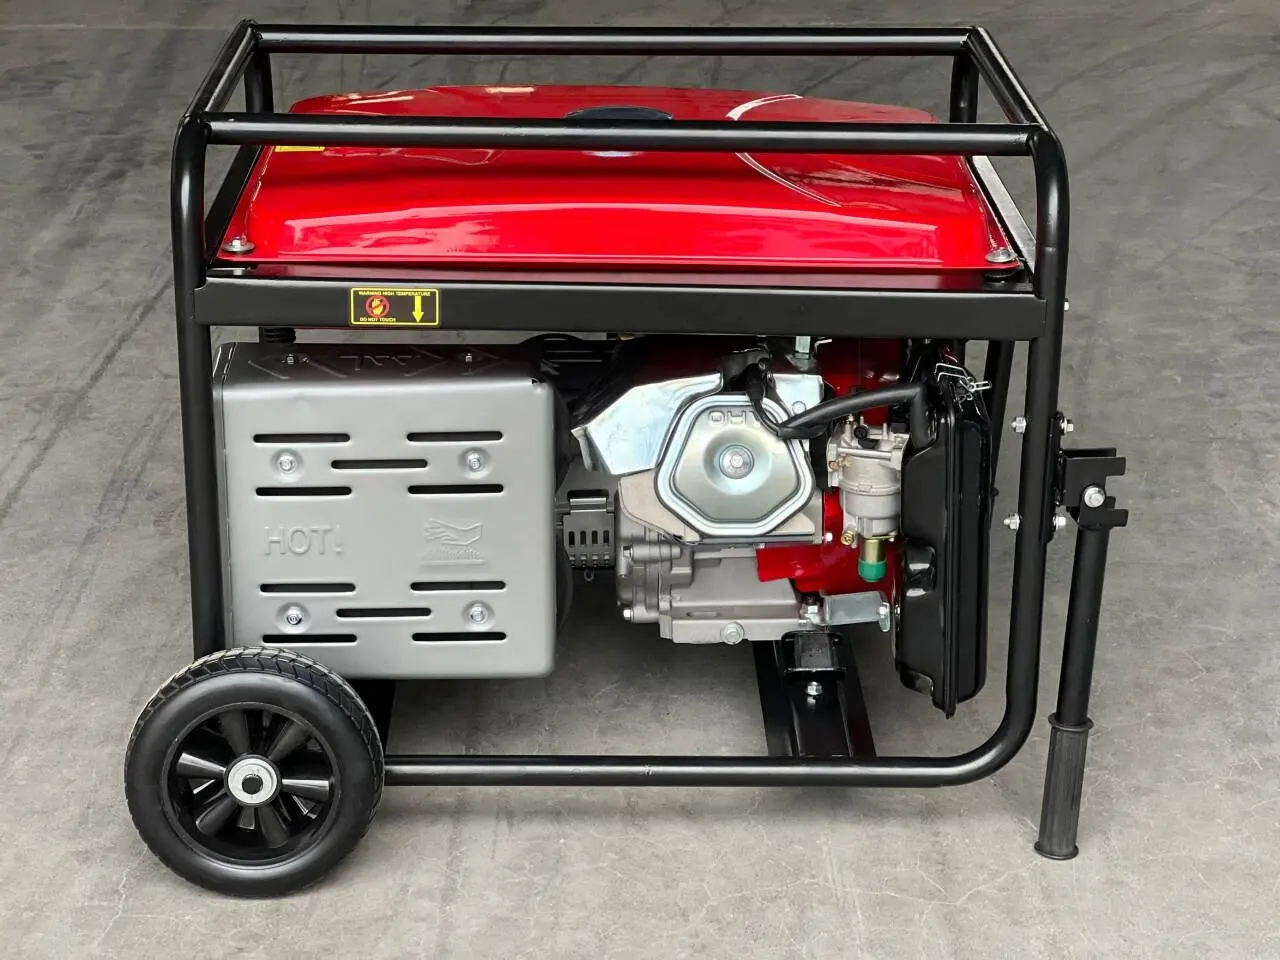 10kva 3 phase gasoline portable generator for home use